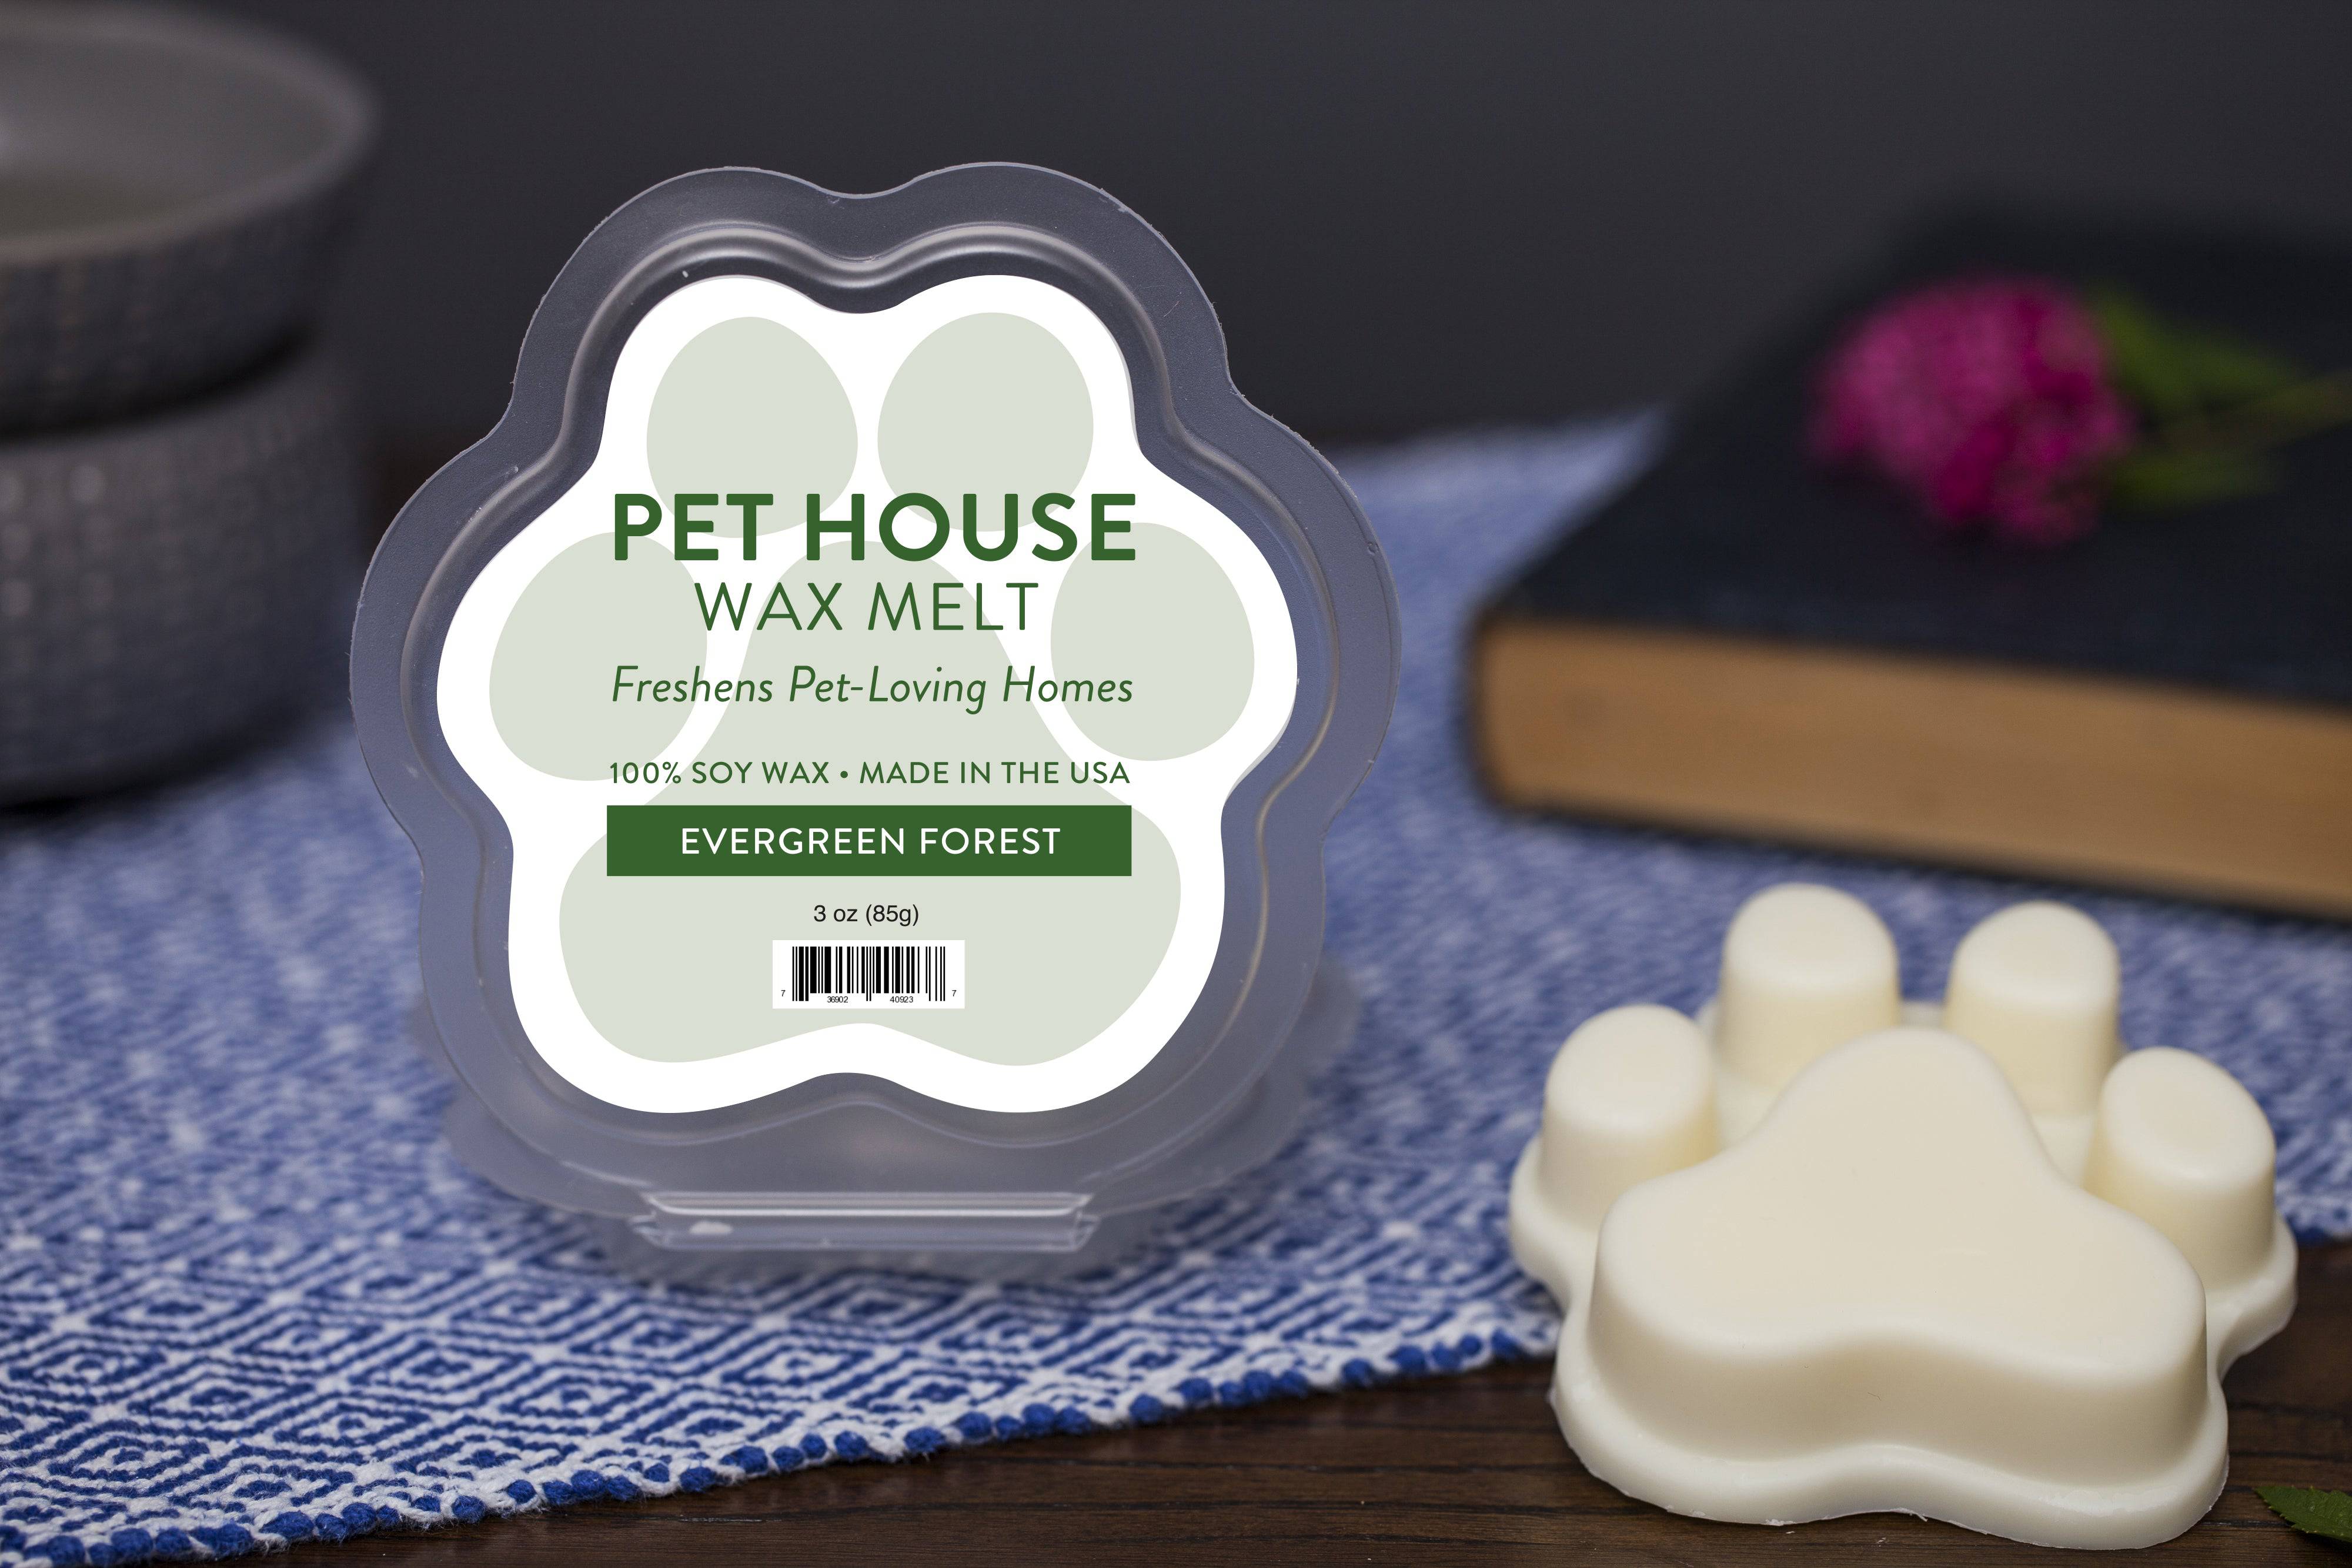 Are Wax Melts Safe For Dogs & Cats? – Village Wax Melts